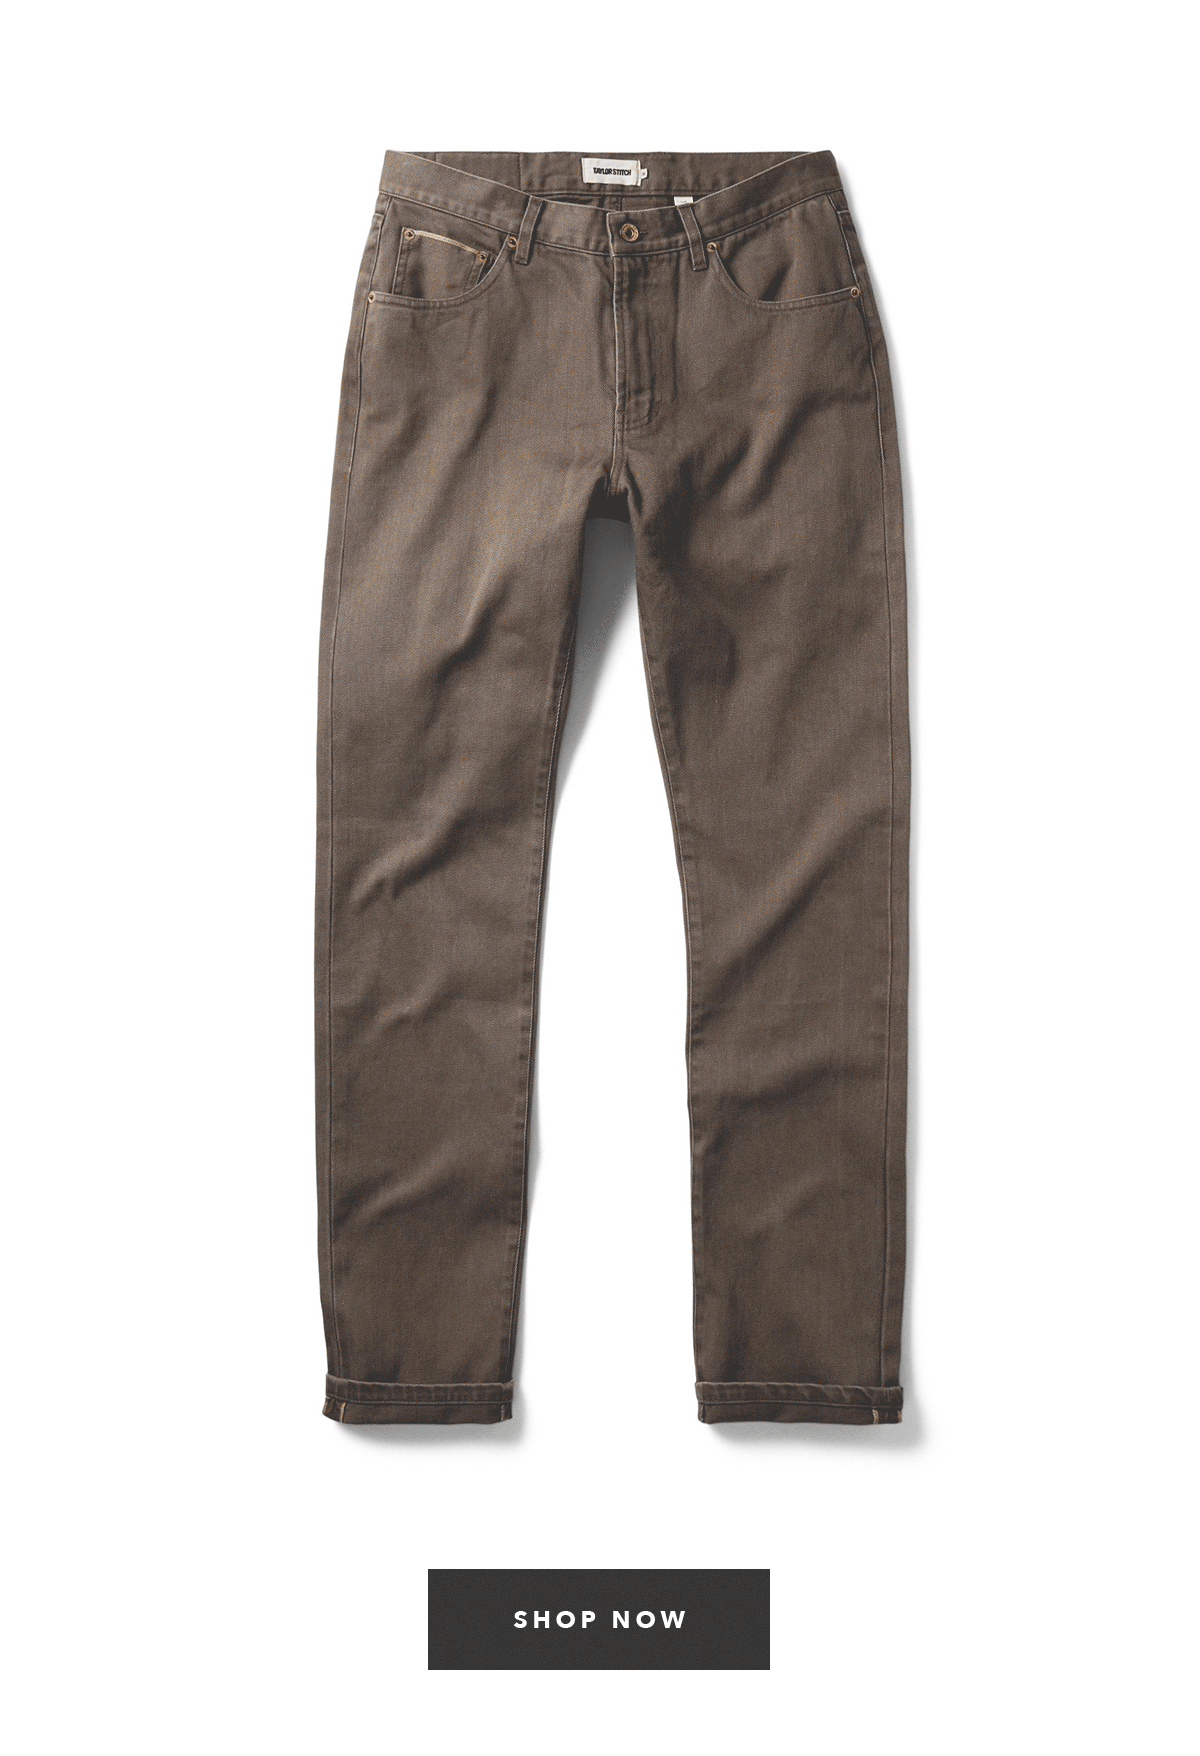 Flatlay of The All Day Pants in Washed Tobacco or Walnut Selvage